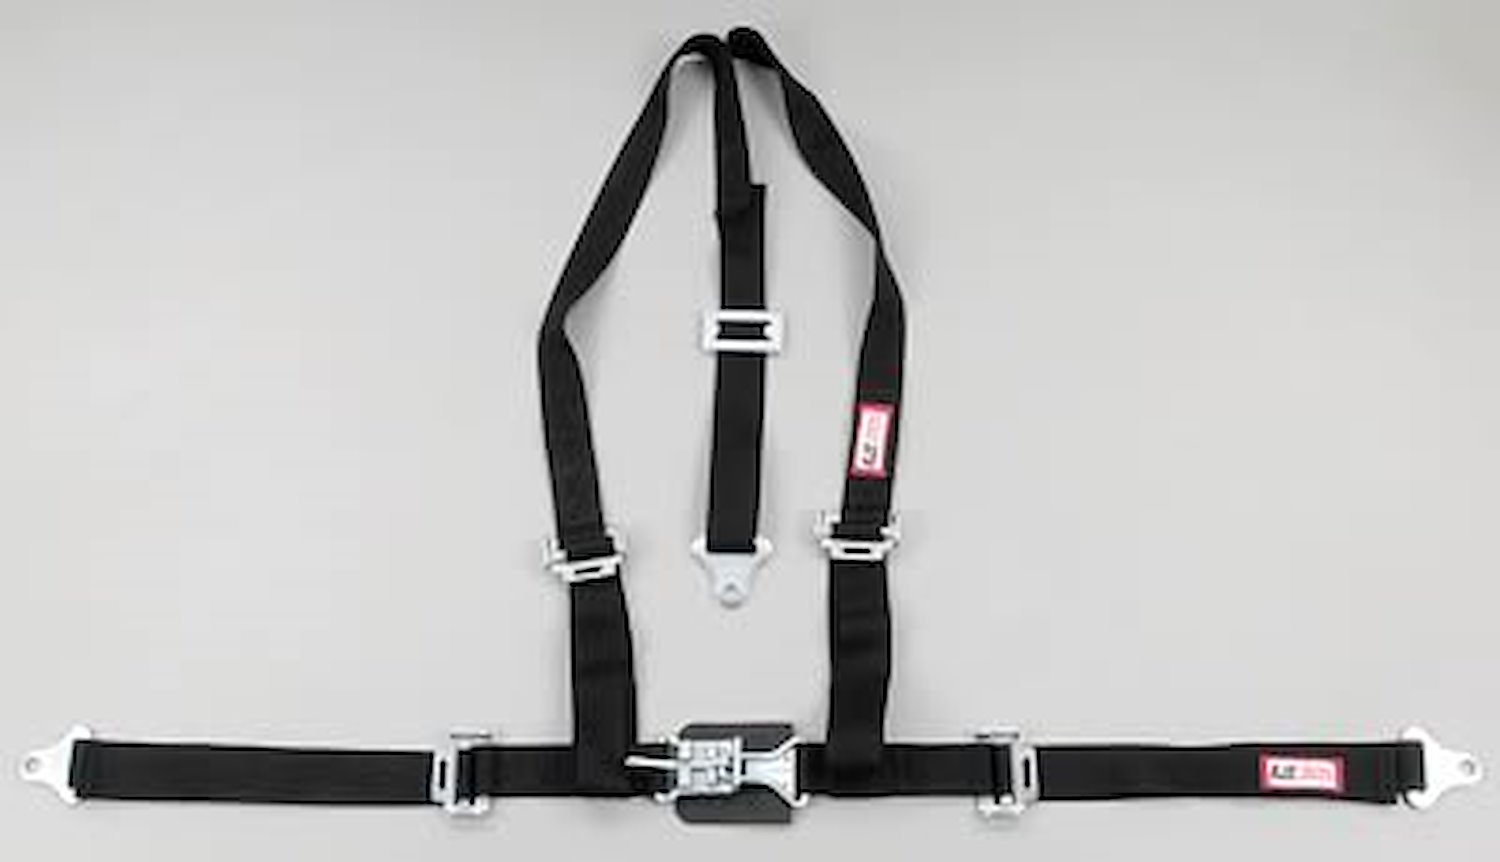 NON-SFI L&L HARNESS 2 PULL UP Lap Belt SEWN IN 2 S.H. V ROLL BAR Mount w/STERNUM STRAP ALL BOLT ENDS PURPLE